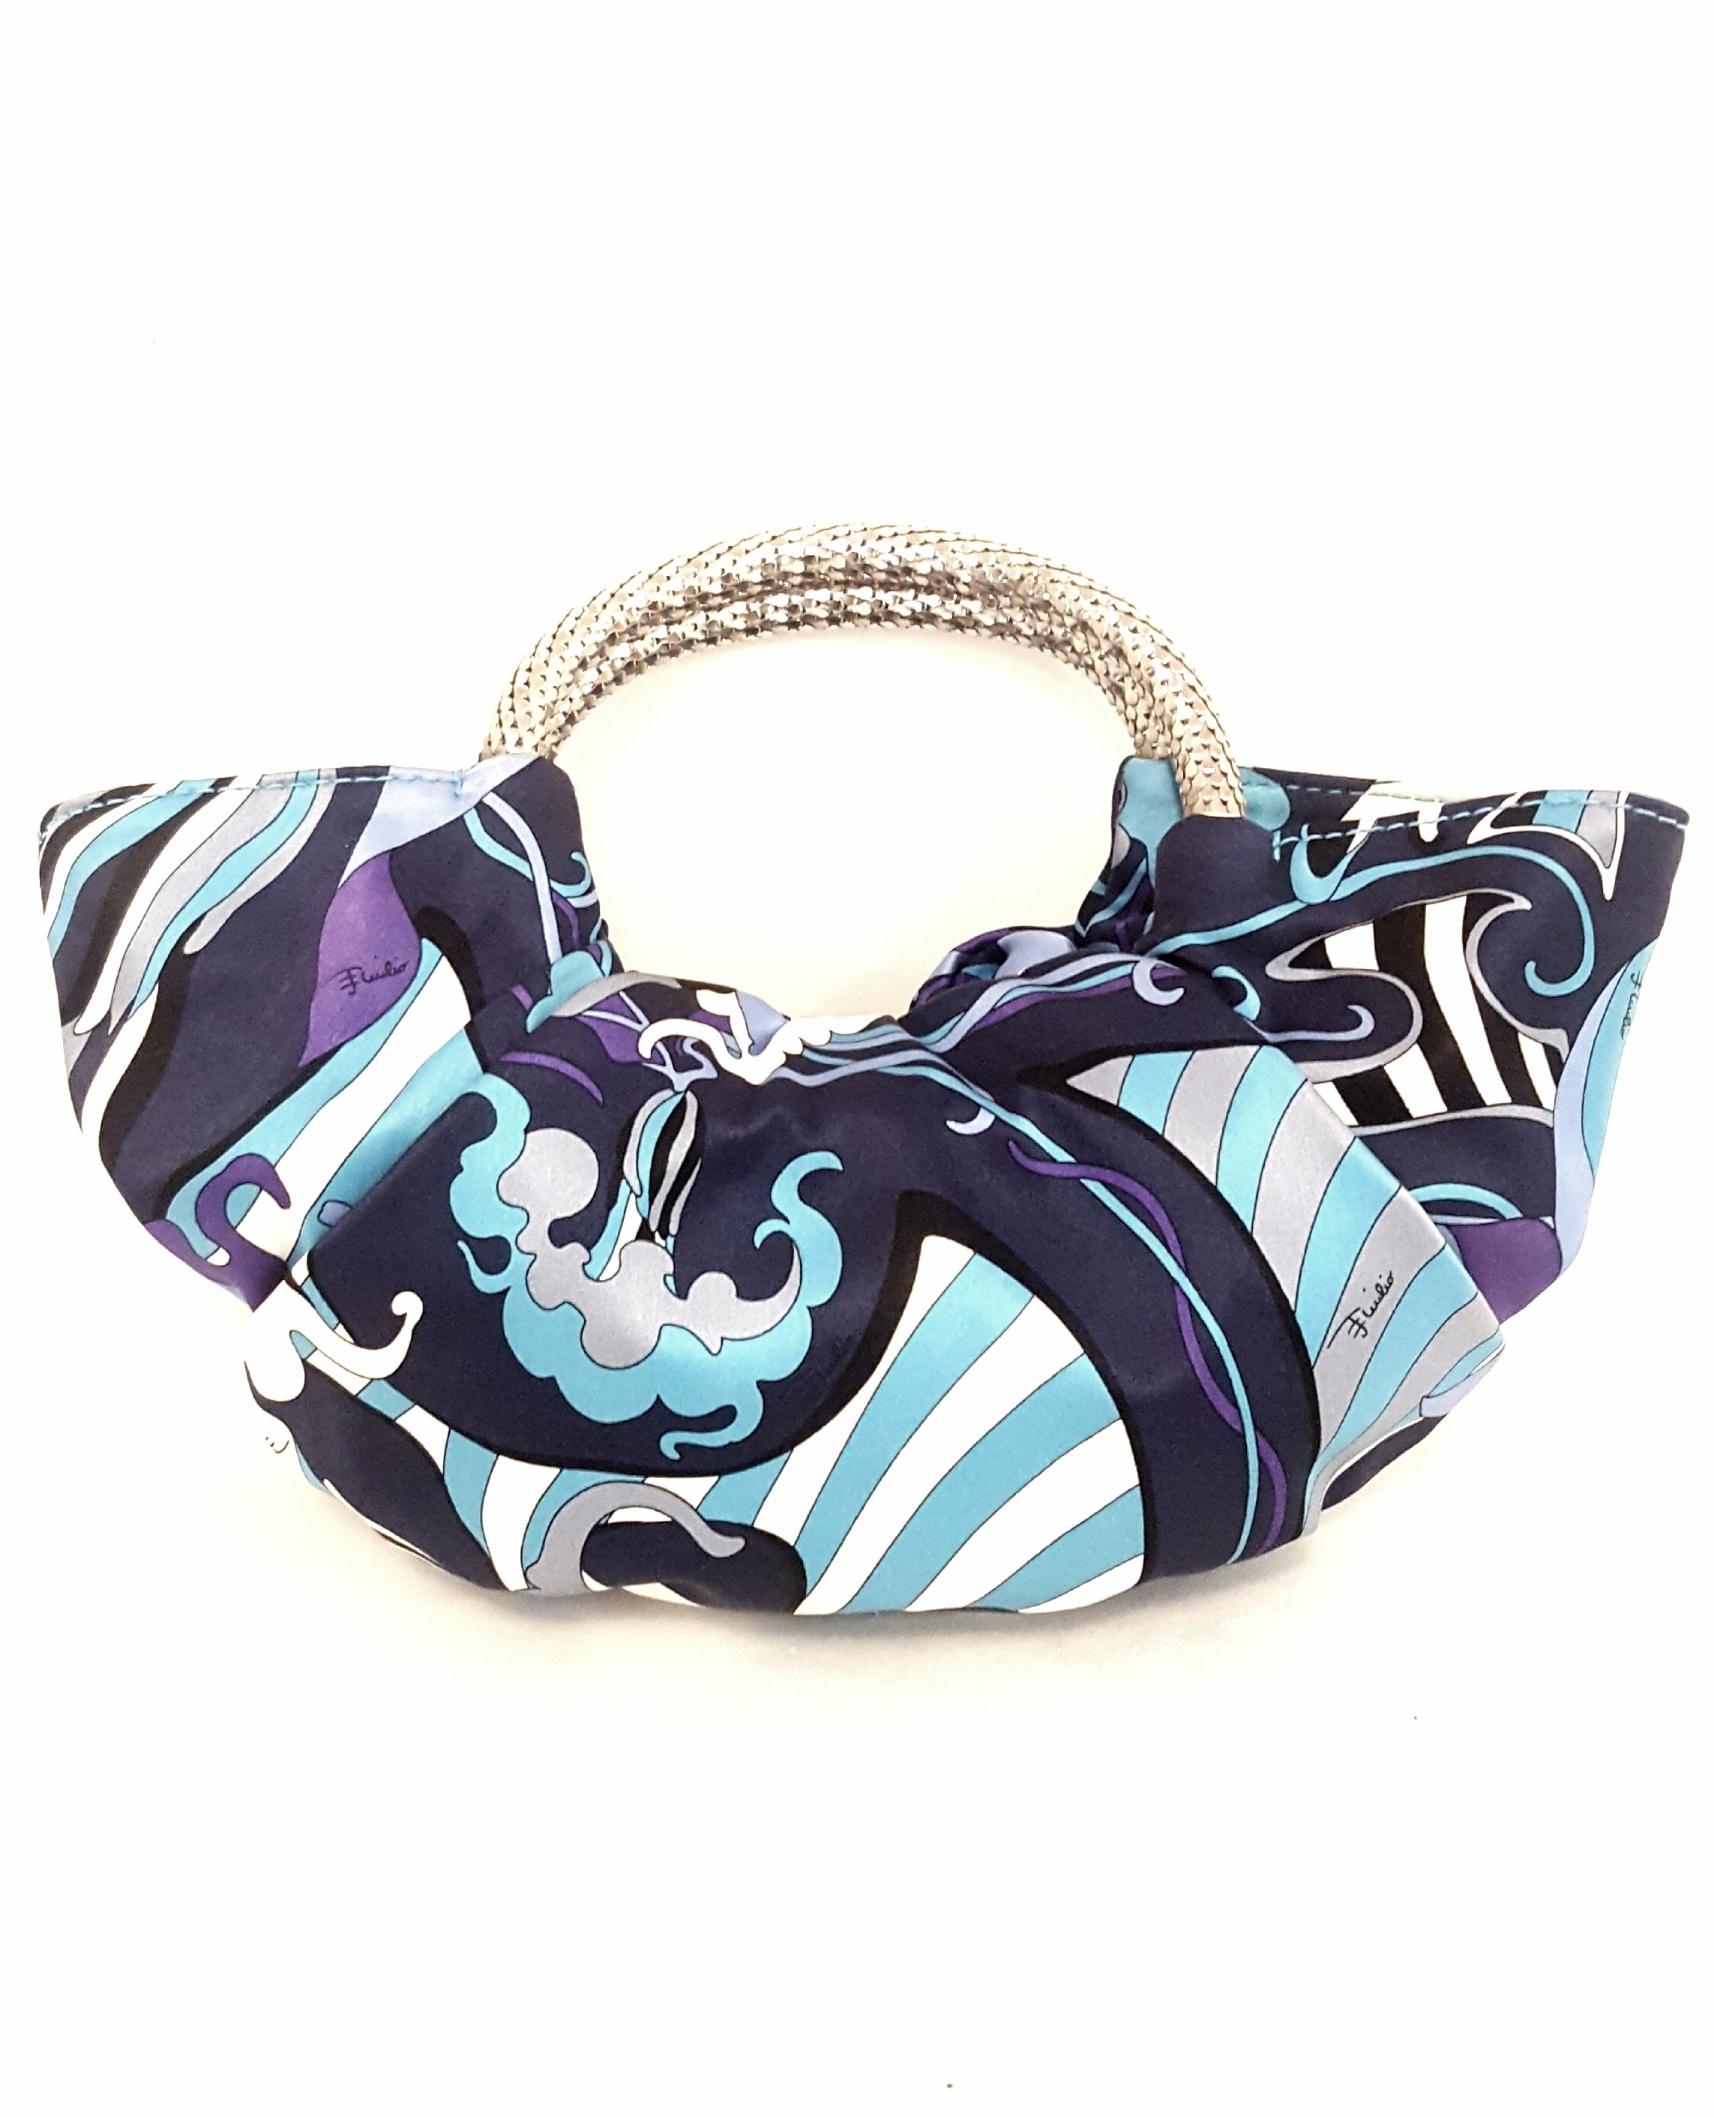 Black Emilio Pucci Blue Abstract Print Evening Bag With Silver Tone Crystal Closure  For Sale